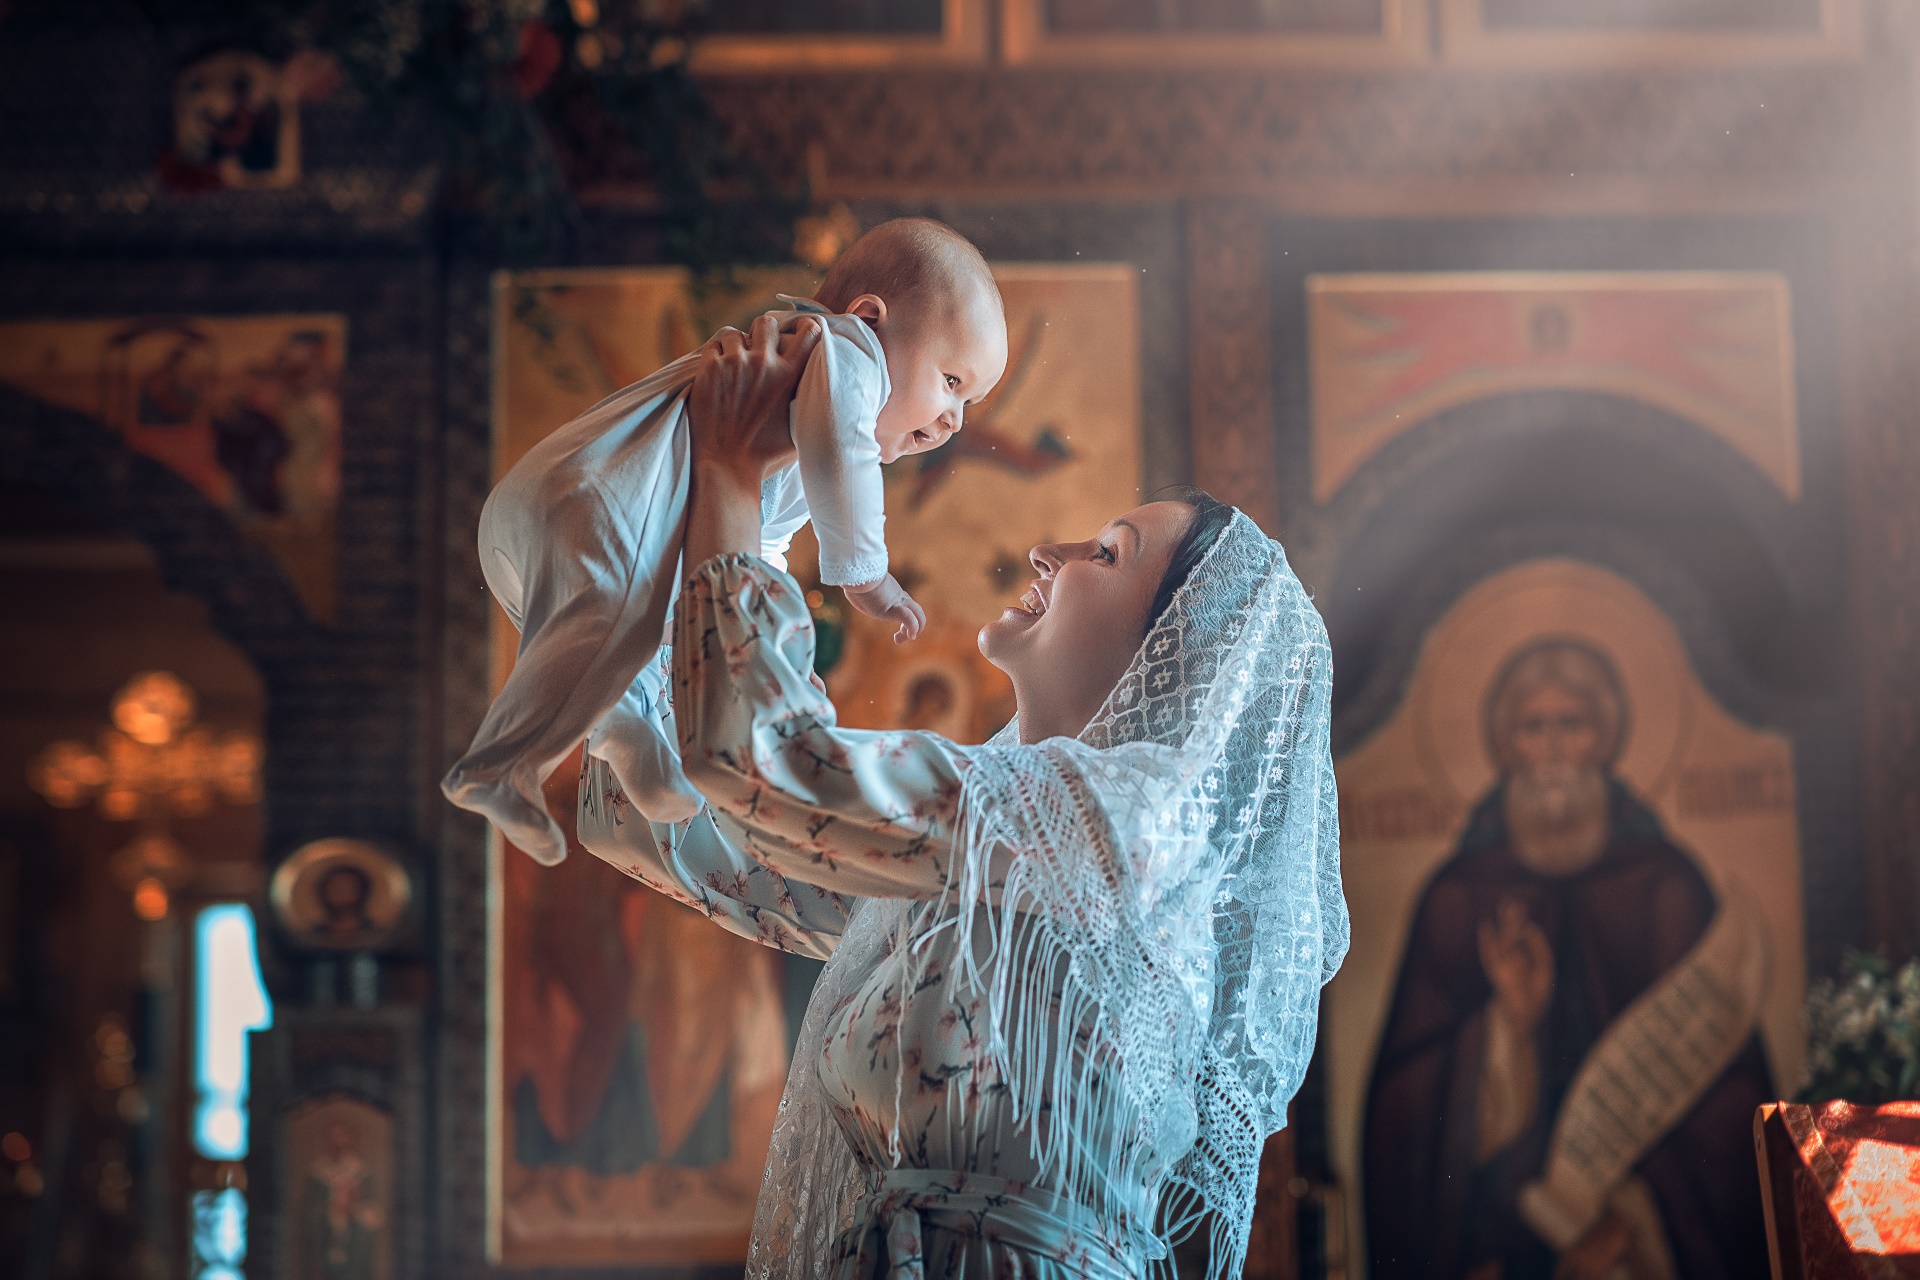 People 1920x1280 church Mother baby love women Russia